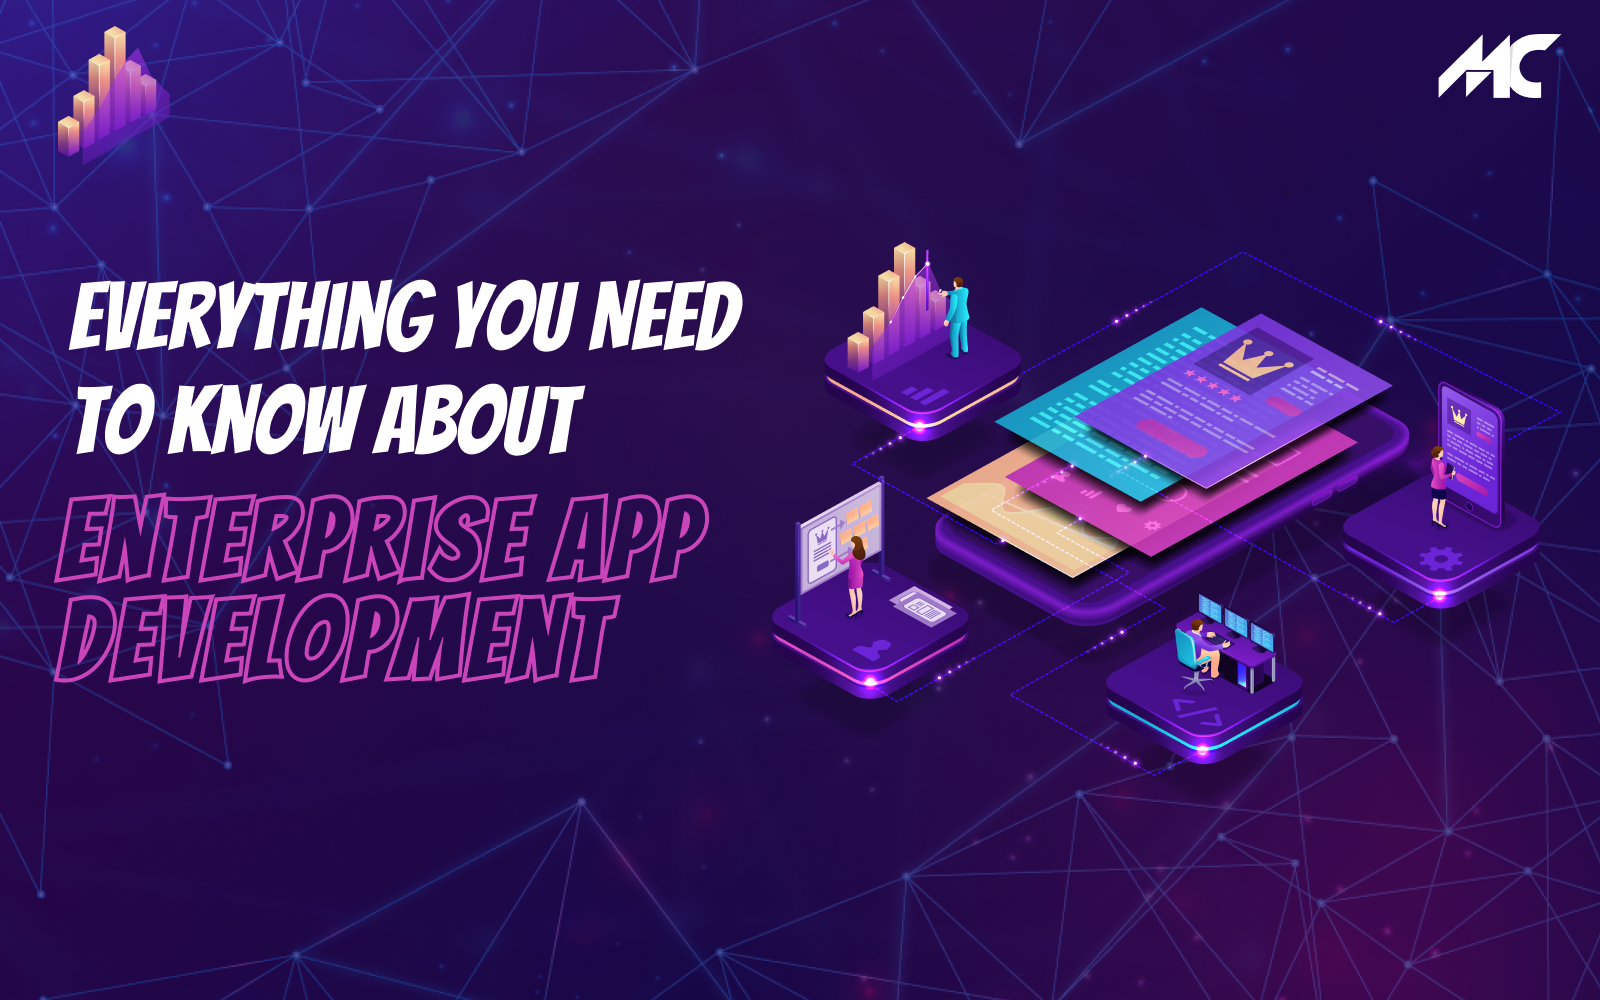 Everything You Need to Know About Enterprise App Development